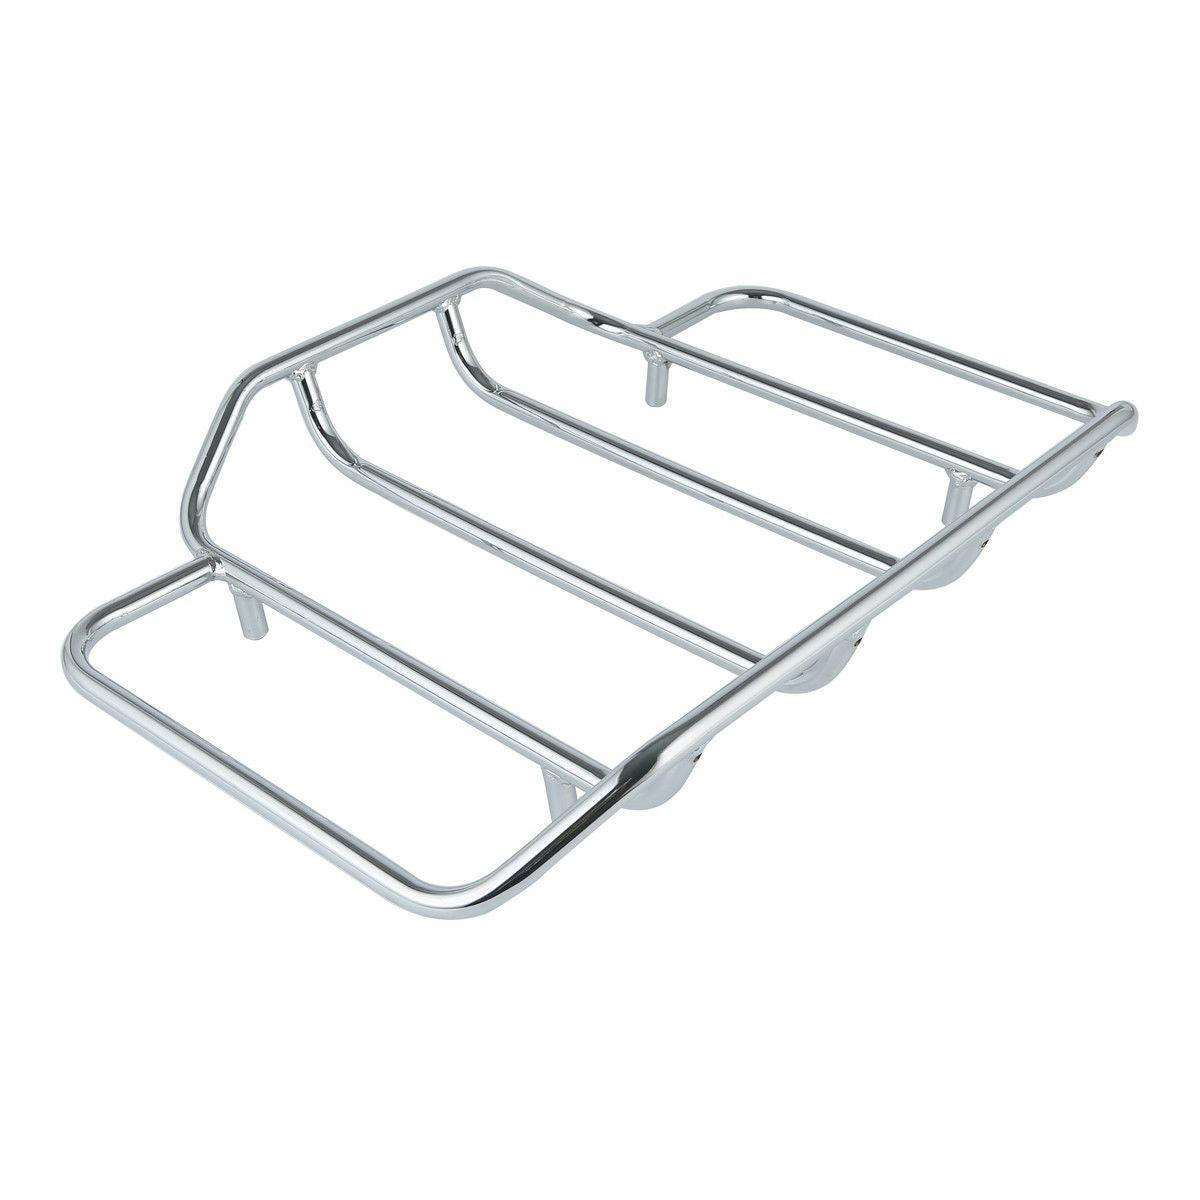 Chrome Luggage Rack Fit For HarleyTour Pak Street Electra Tri Glide Road King - Moto Life Products